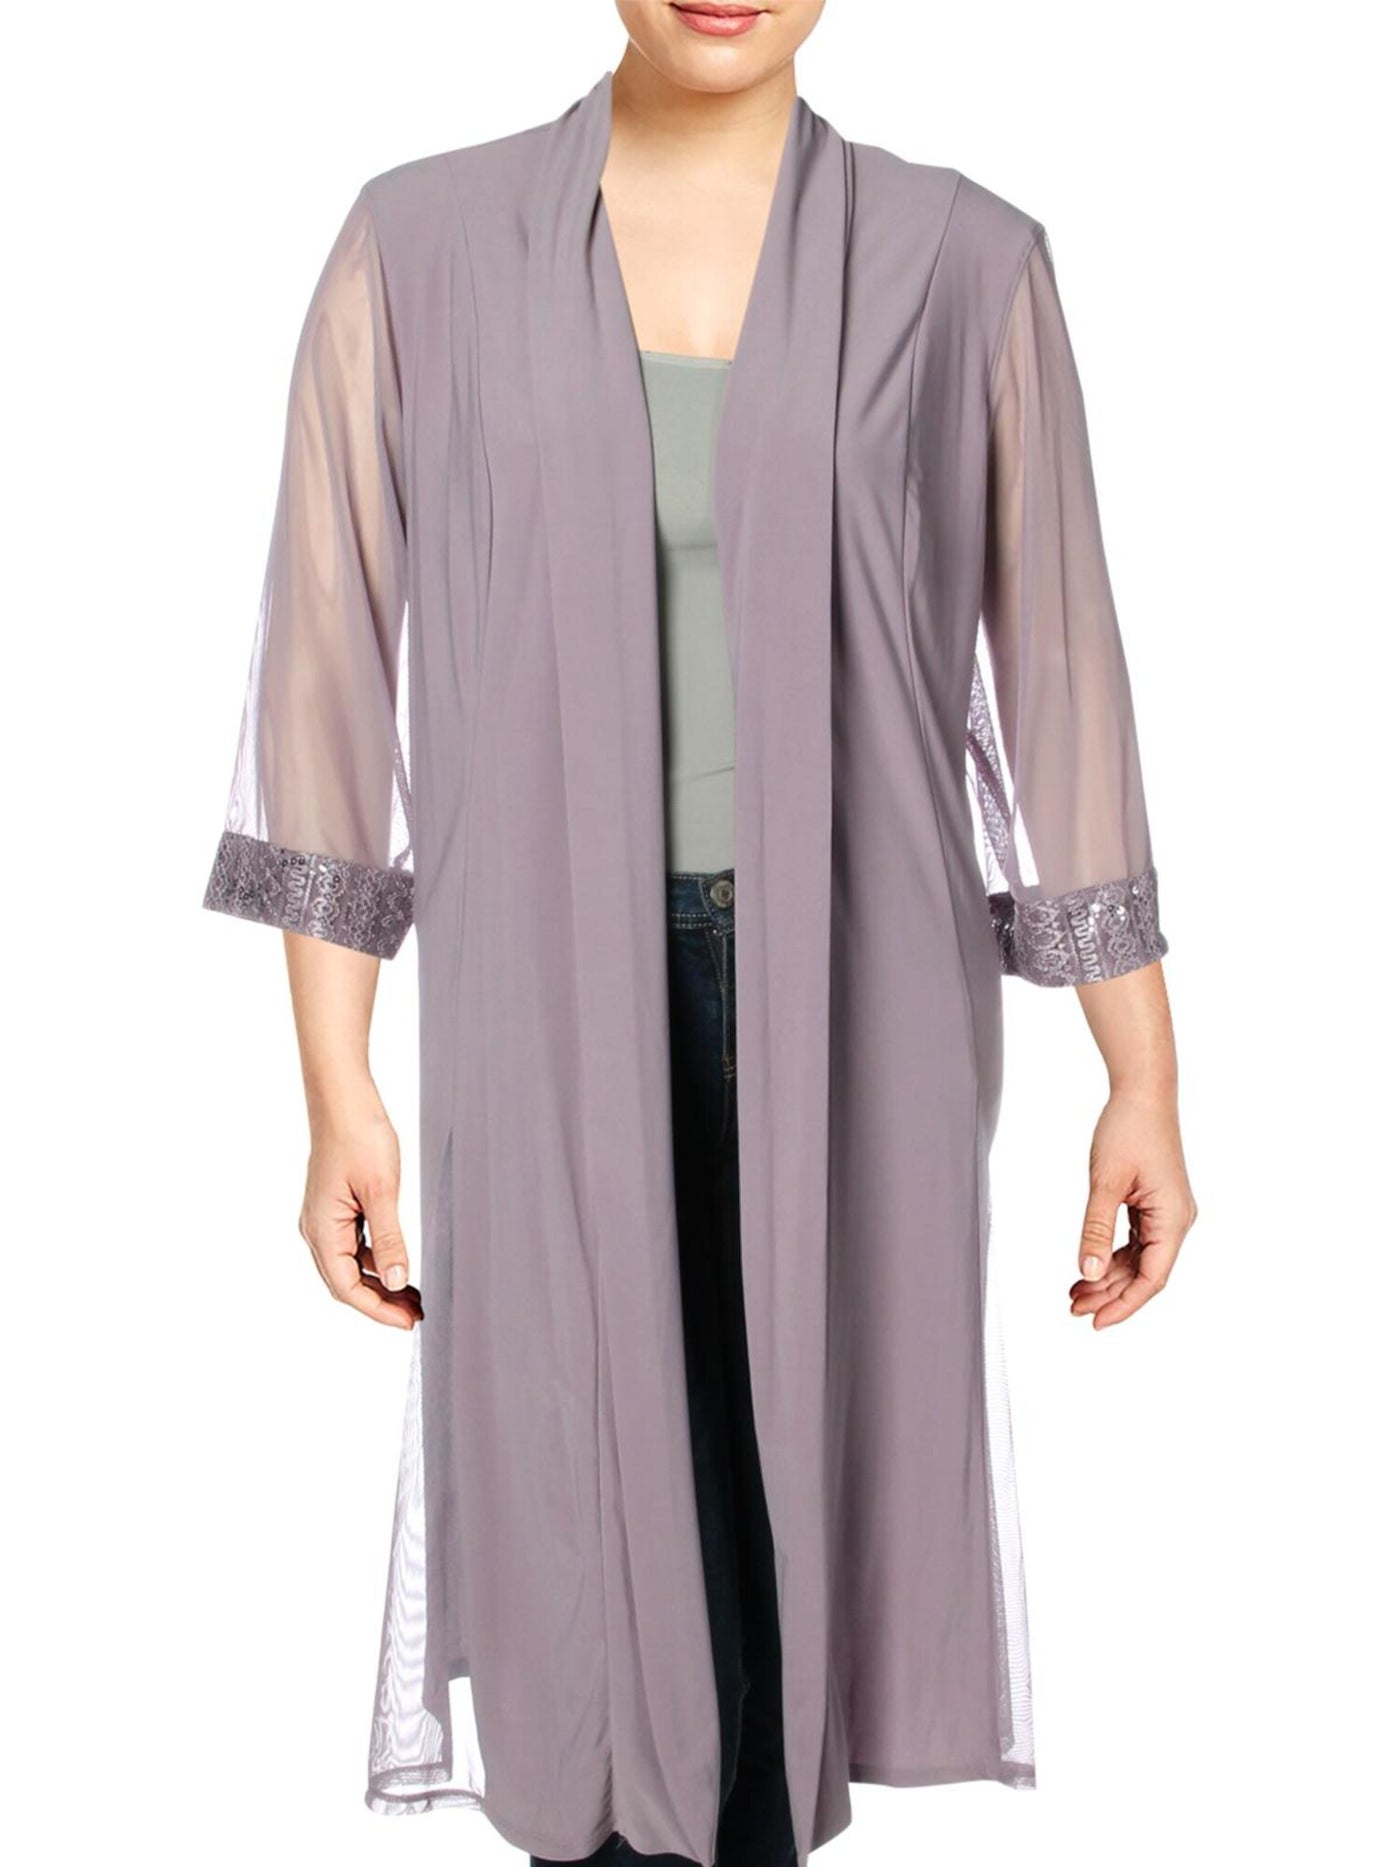 R&M RICHARDS Womens Beige Embellished Sheer Open Front 3/4 Sleeve Duster Top Plus 16W